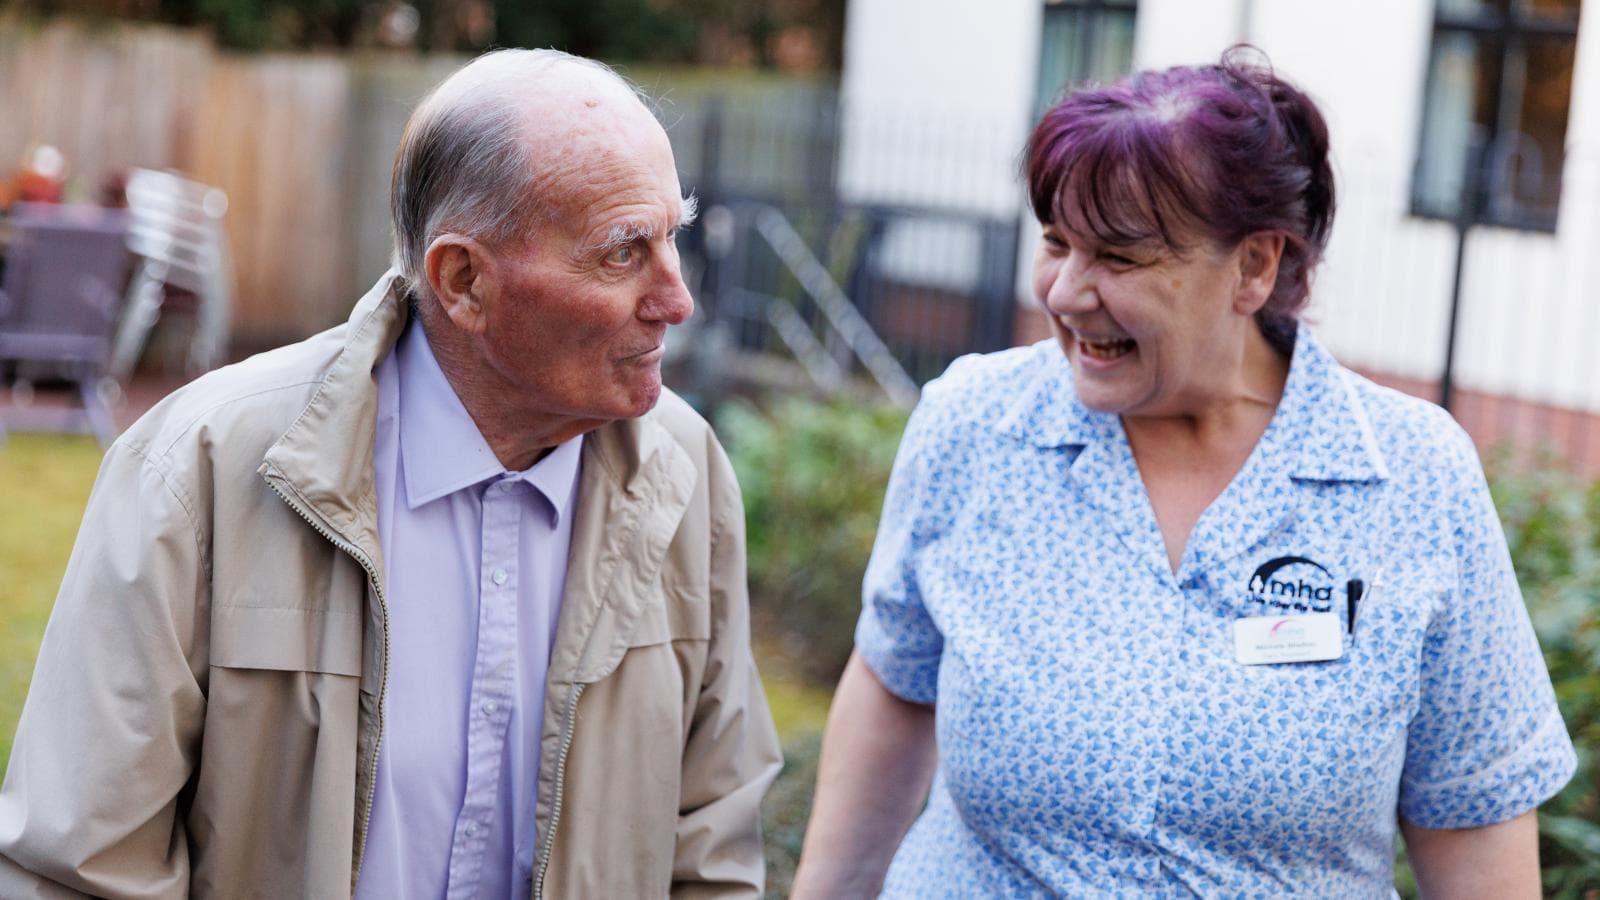 Care assistant laughs with a male resident outside in the garden